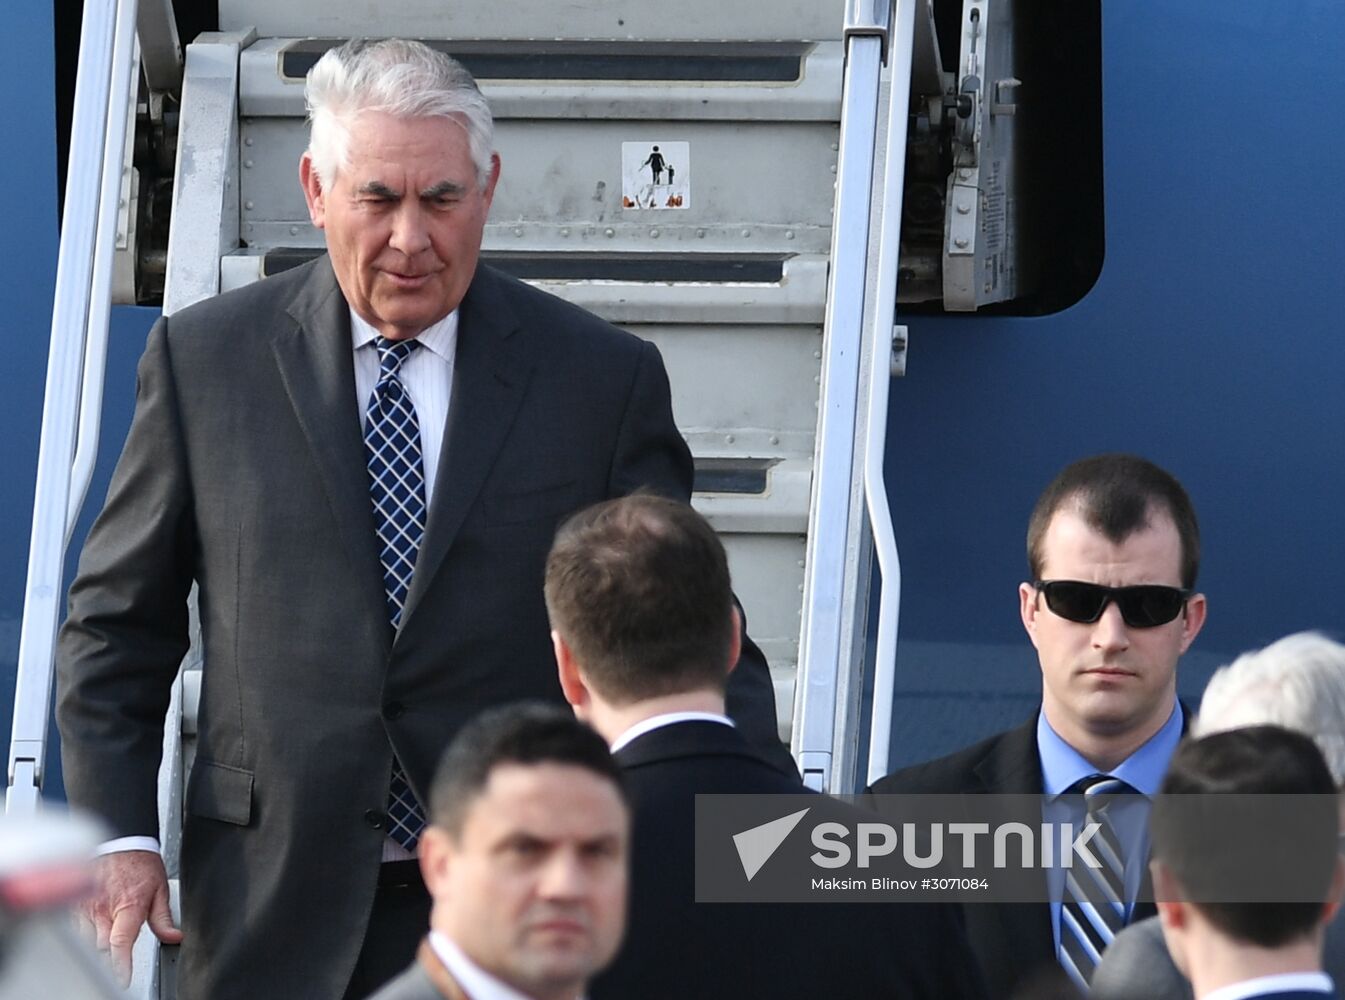 United States Secretary of State Rex Tillerson makes working visit to Russia